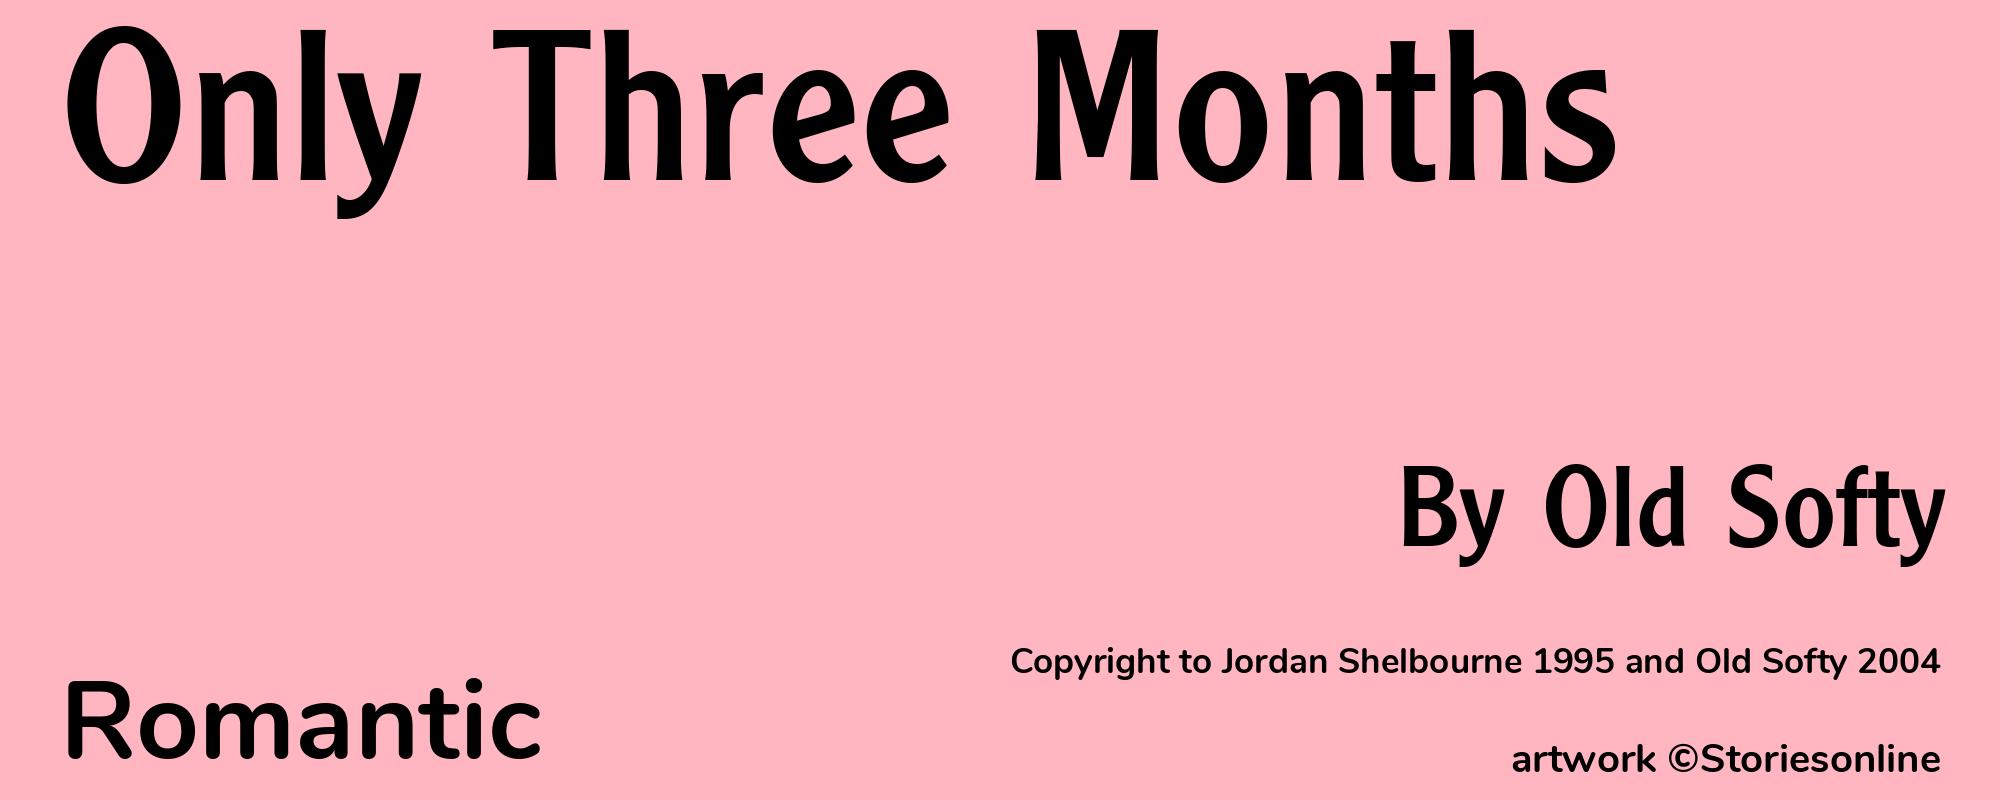 Only Three Months - Cover